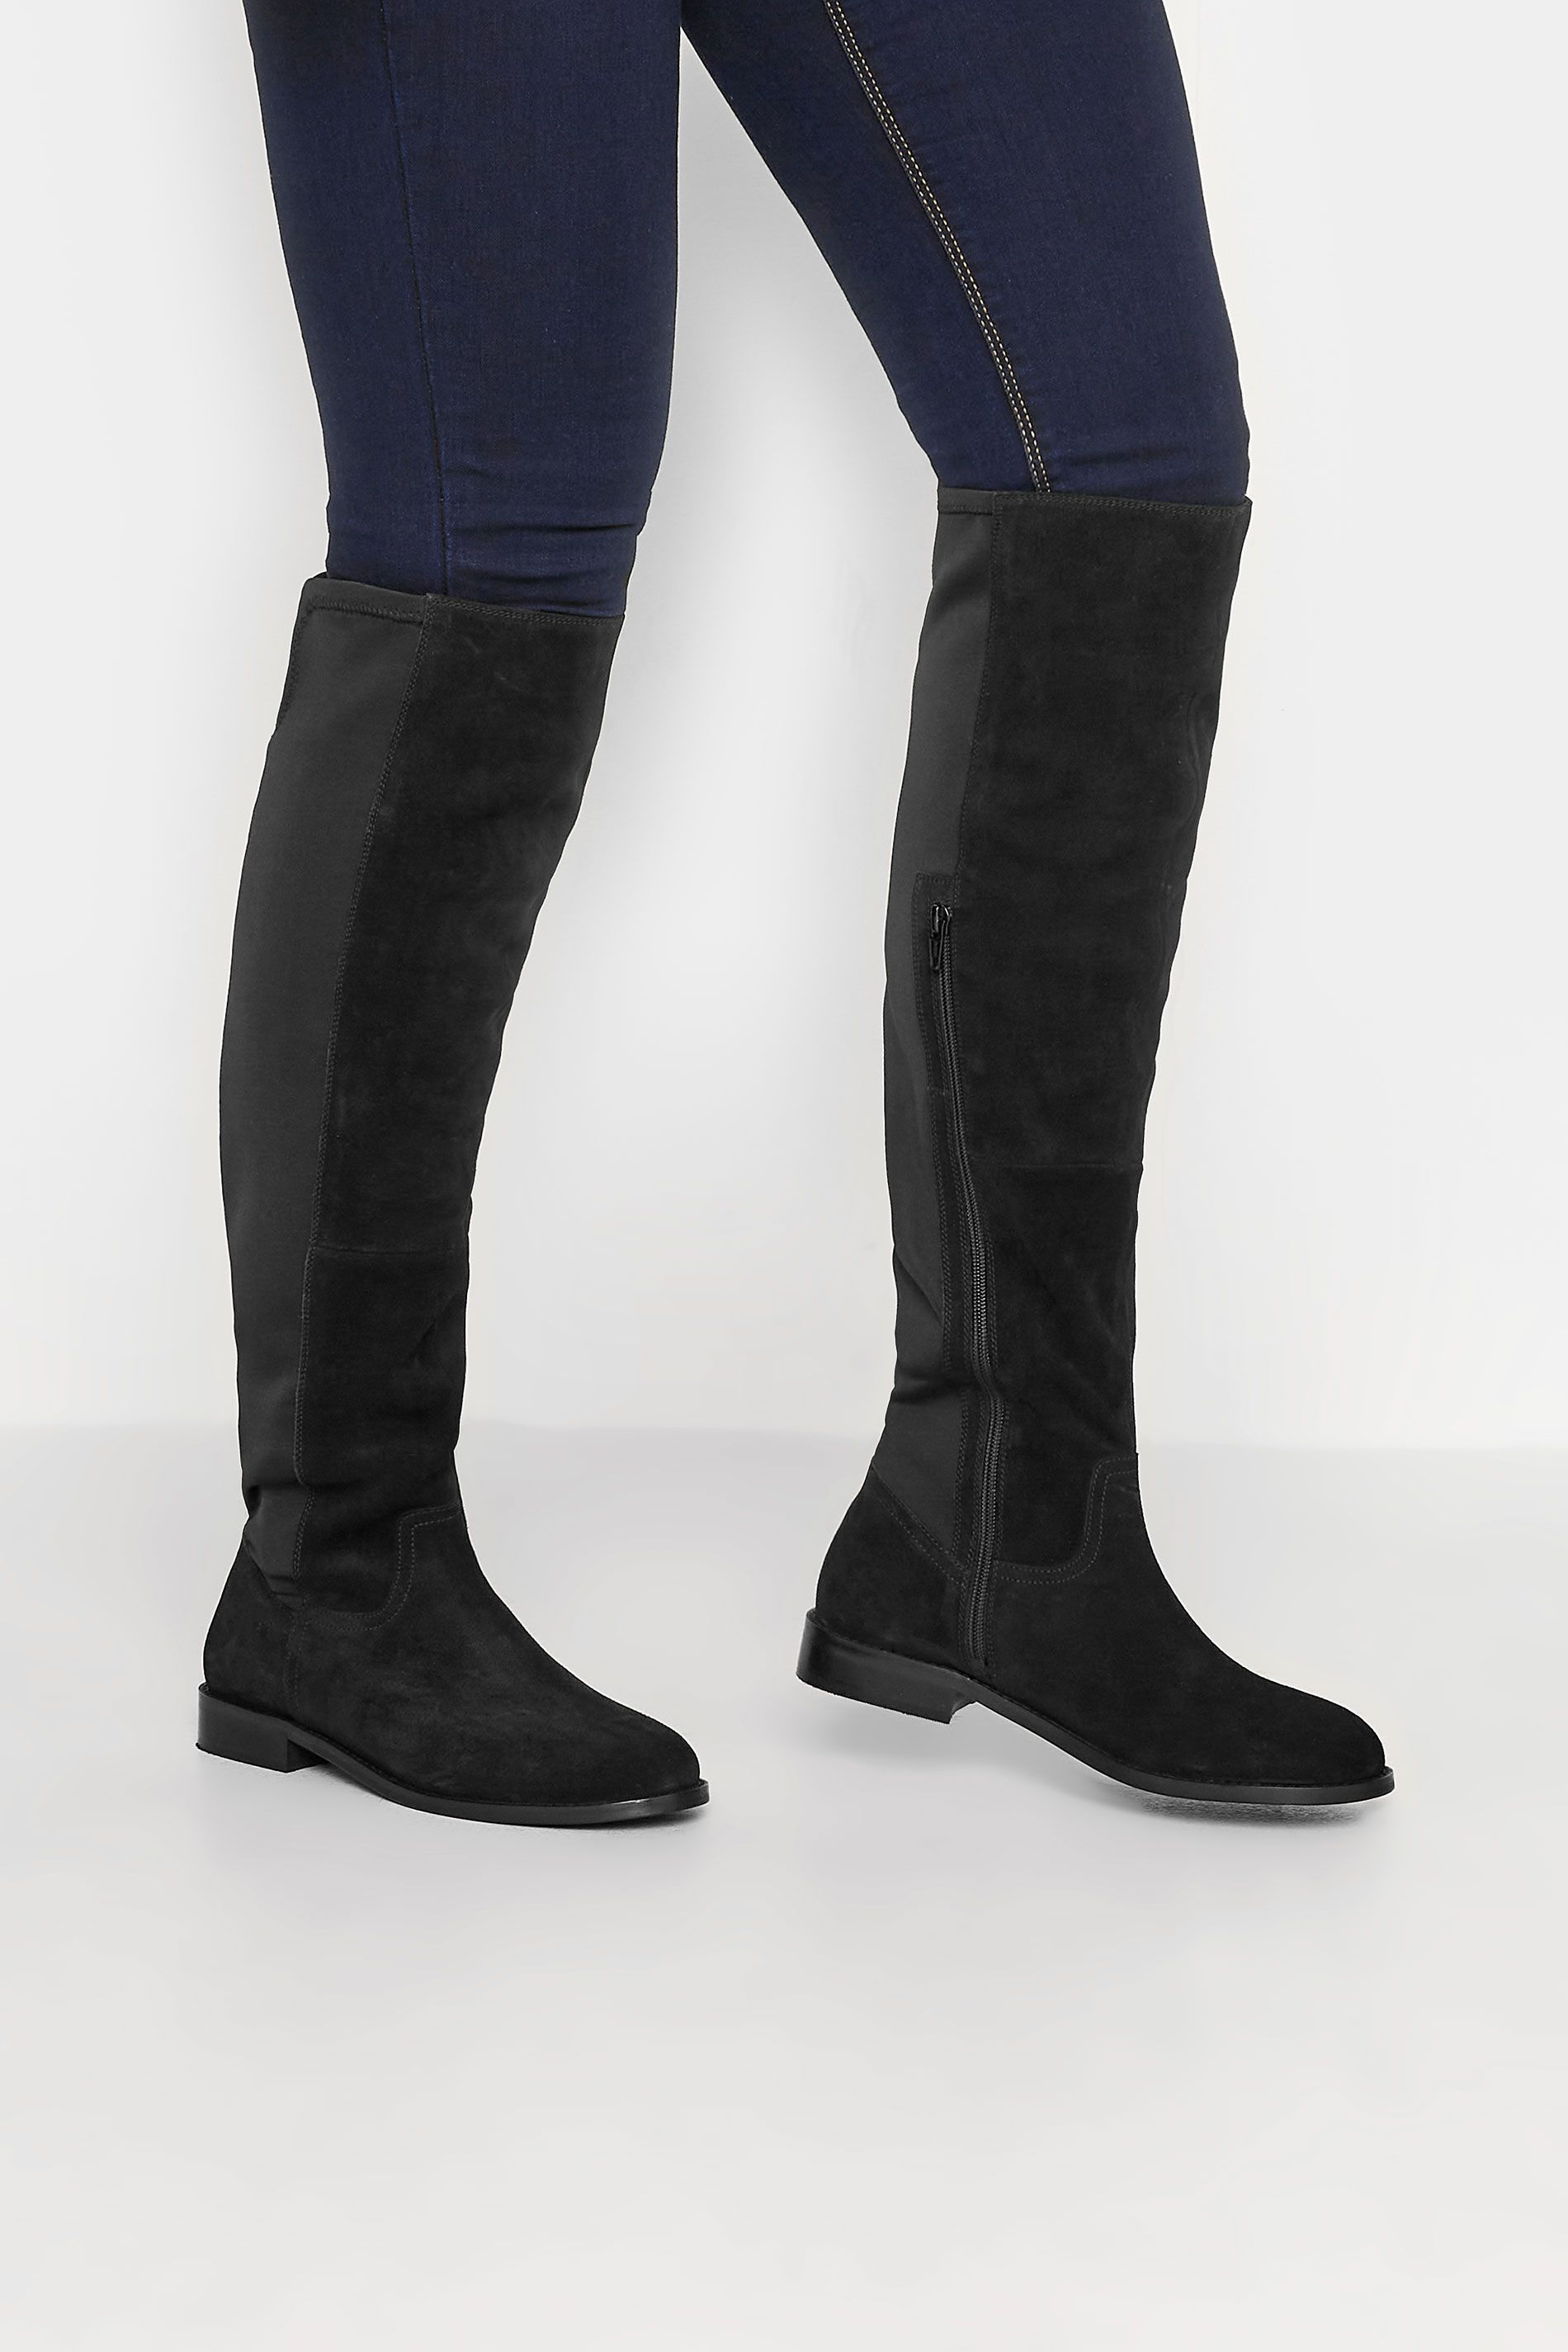 LTS Black Over The Knee 50/50 Suede Boot In Standard Fit | Long Tall Sally